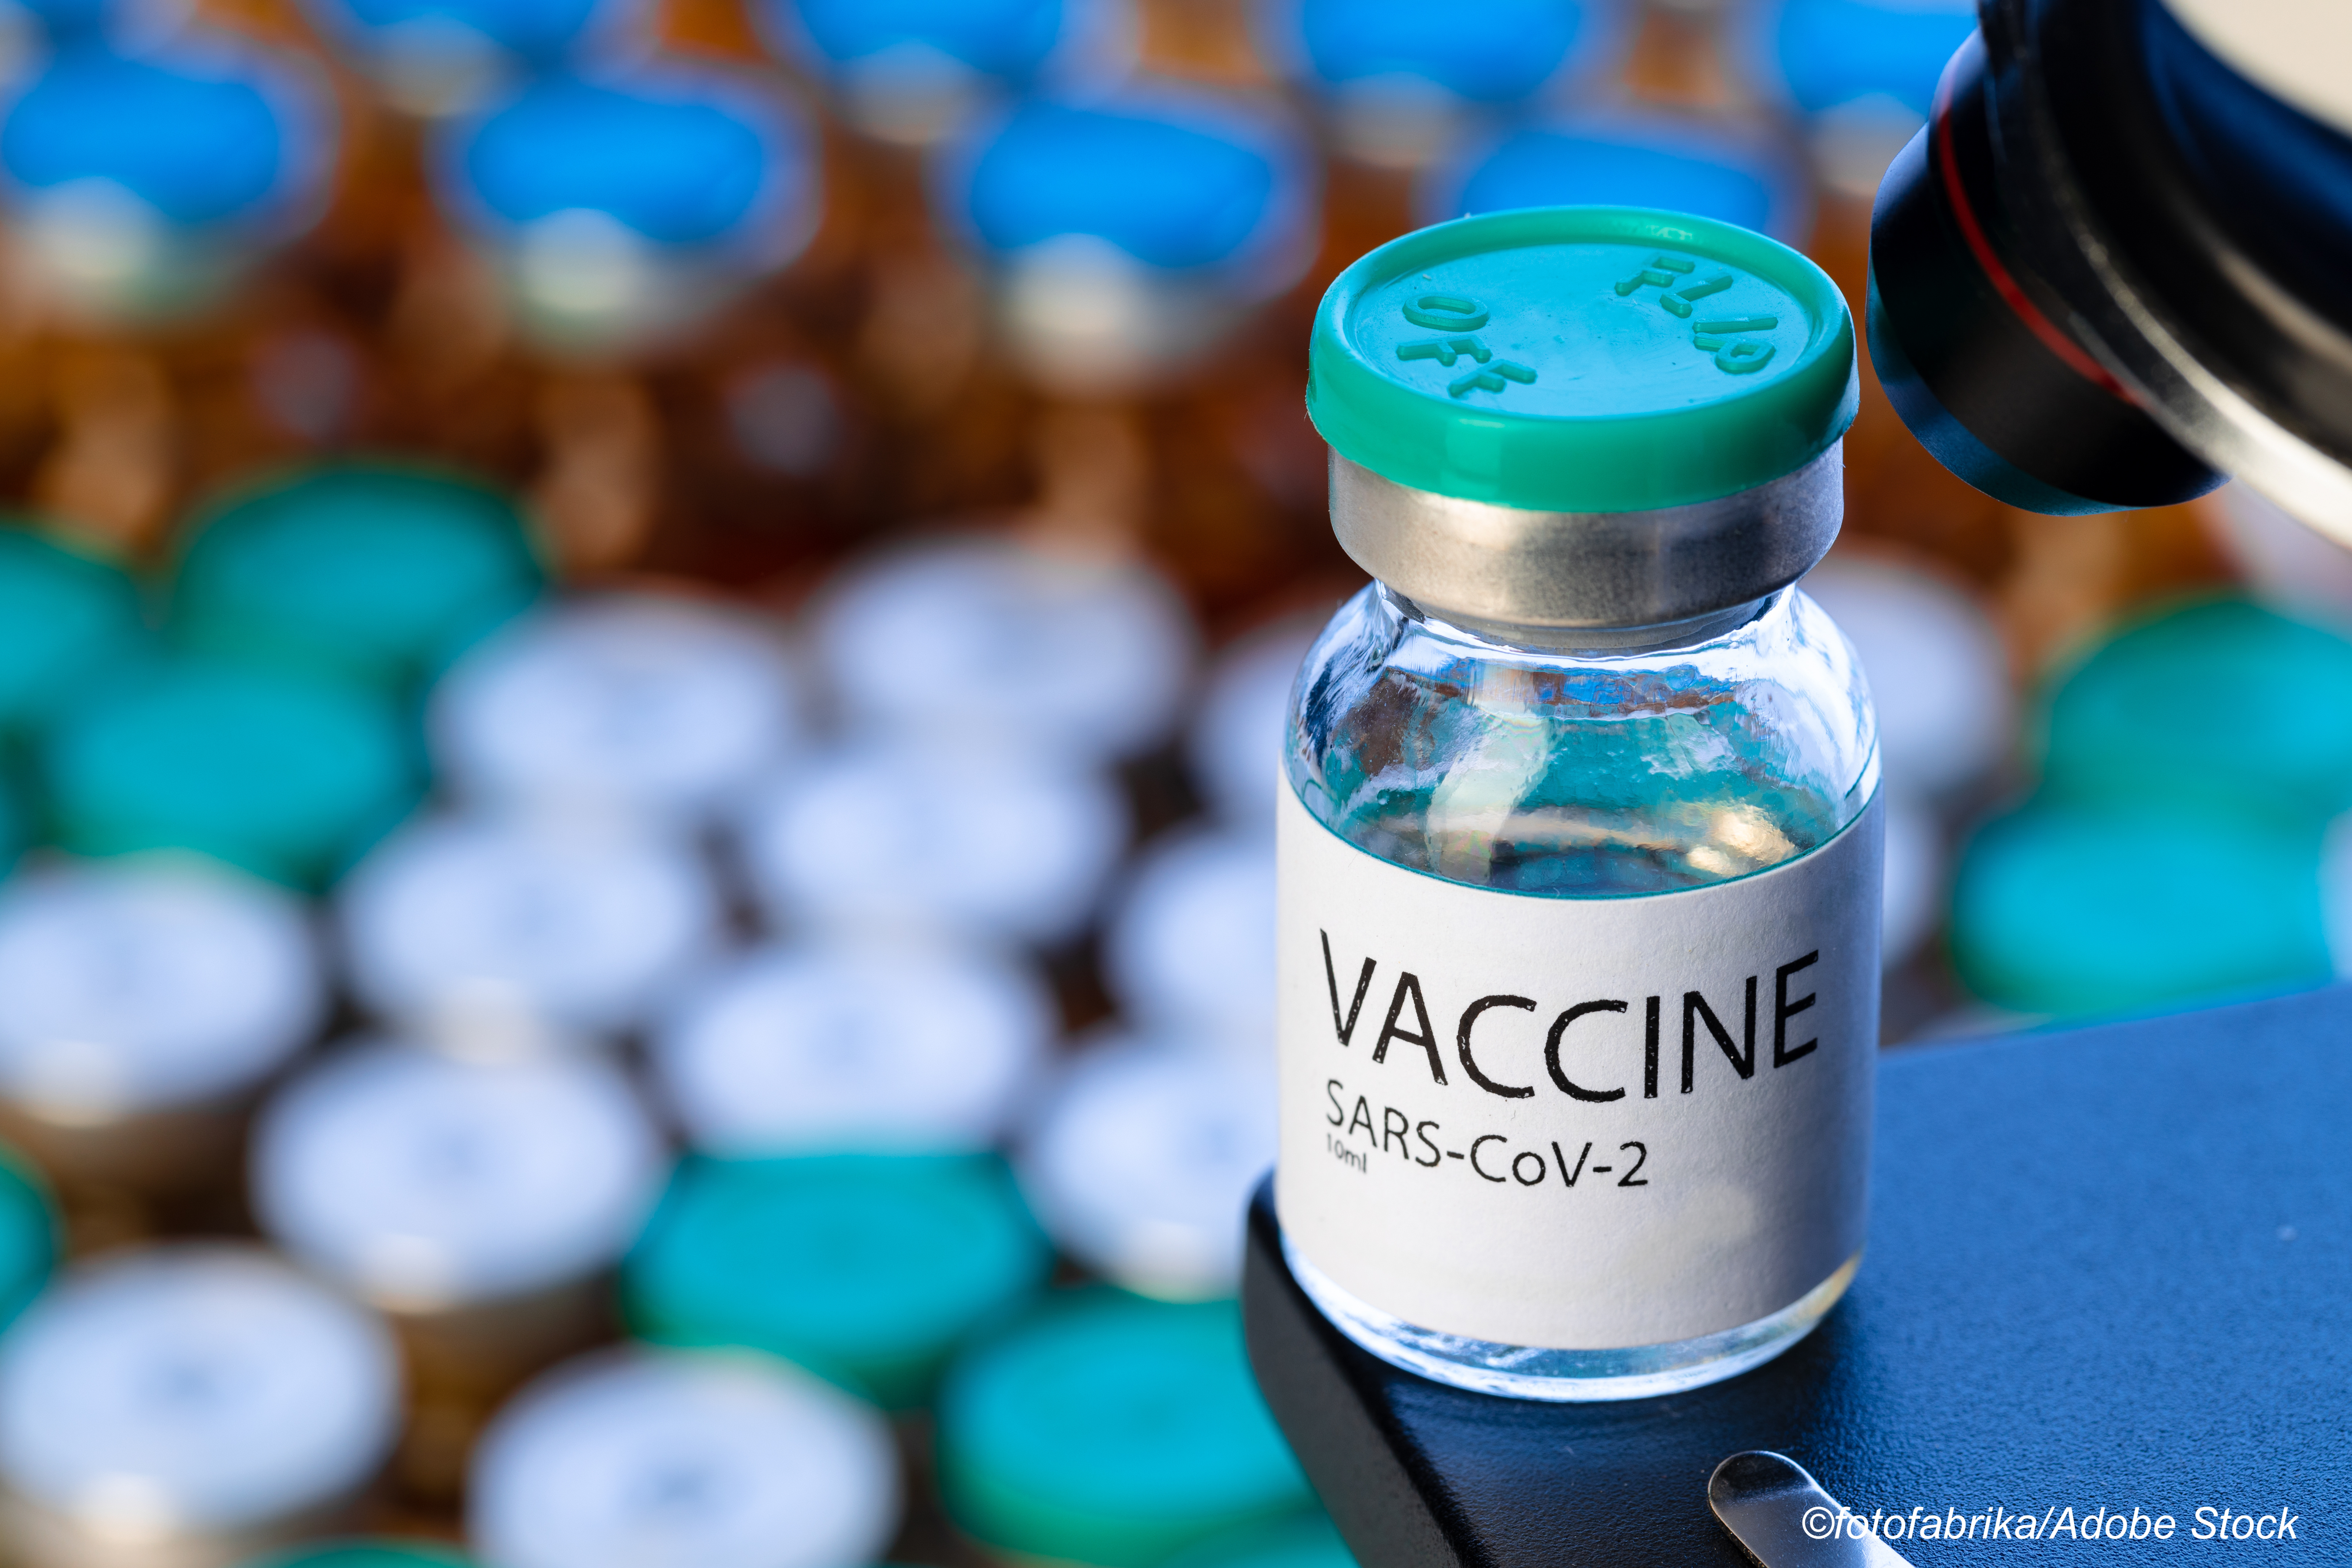 Covid-19: mRNA Vaccine Protection Less Robust in Immunocompromised, Study Confirms